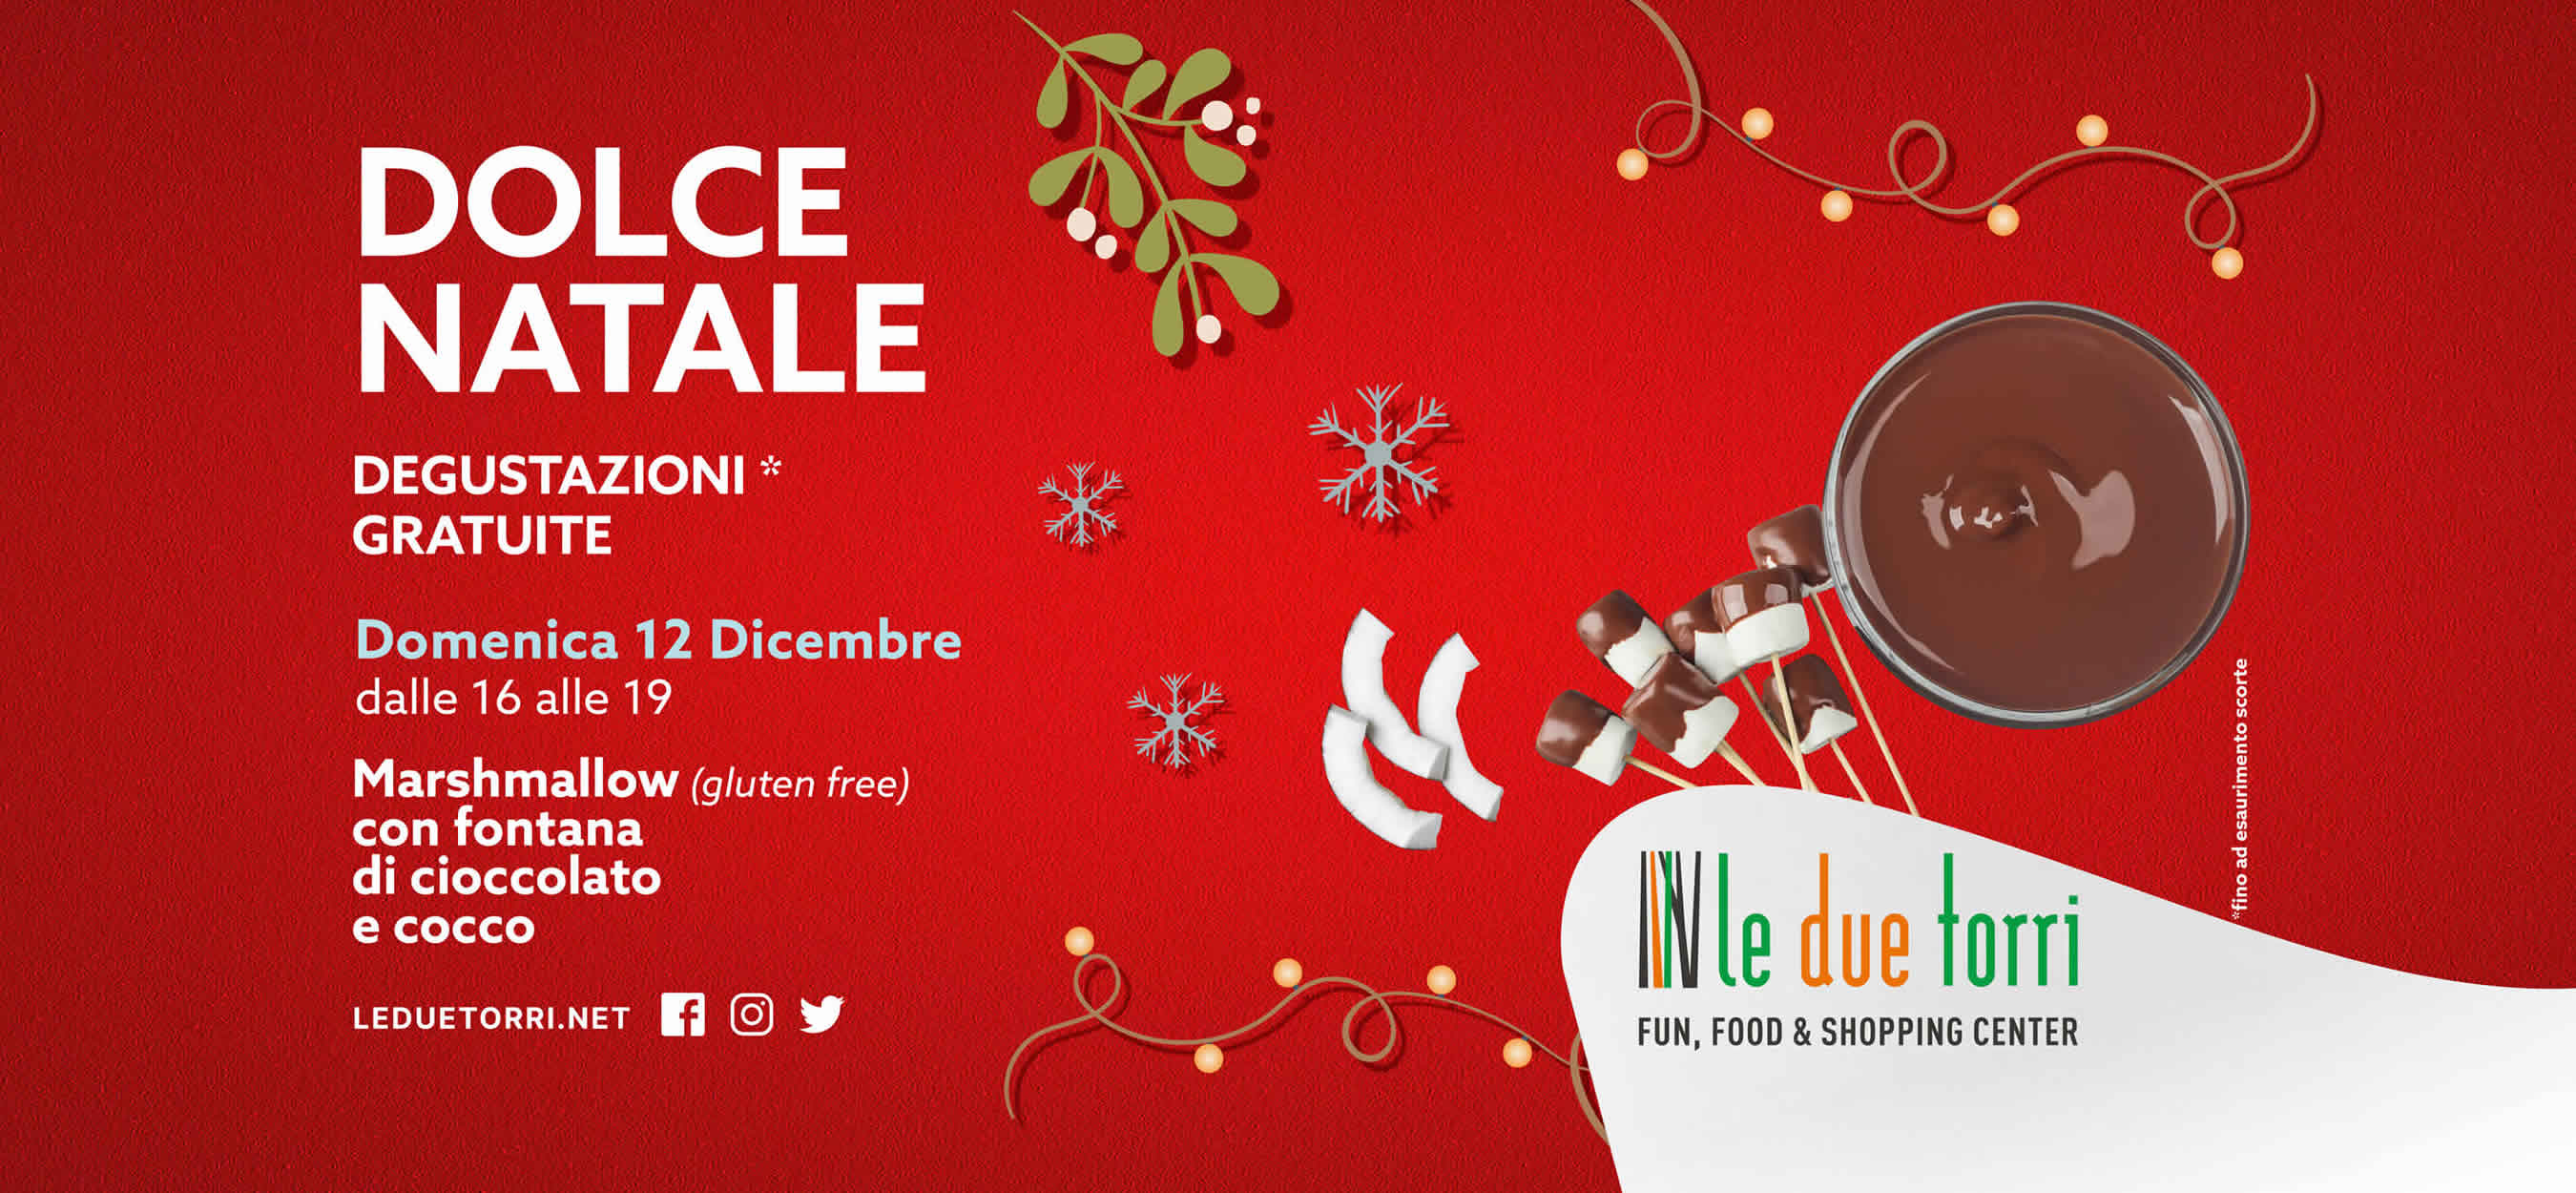 Dolce Natale - 26/12/21